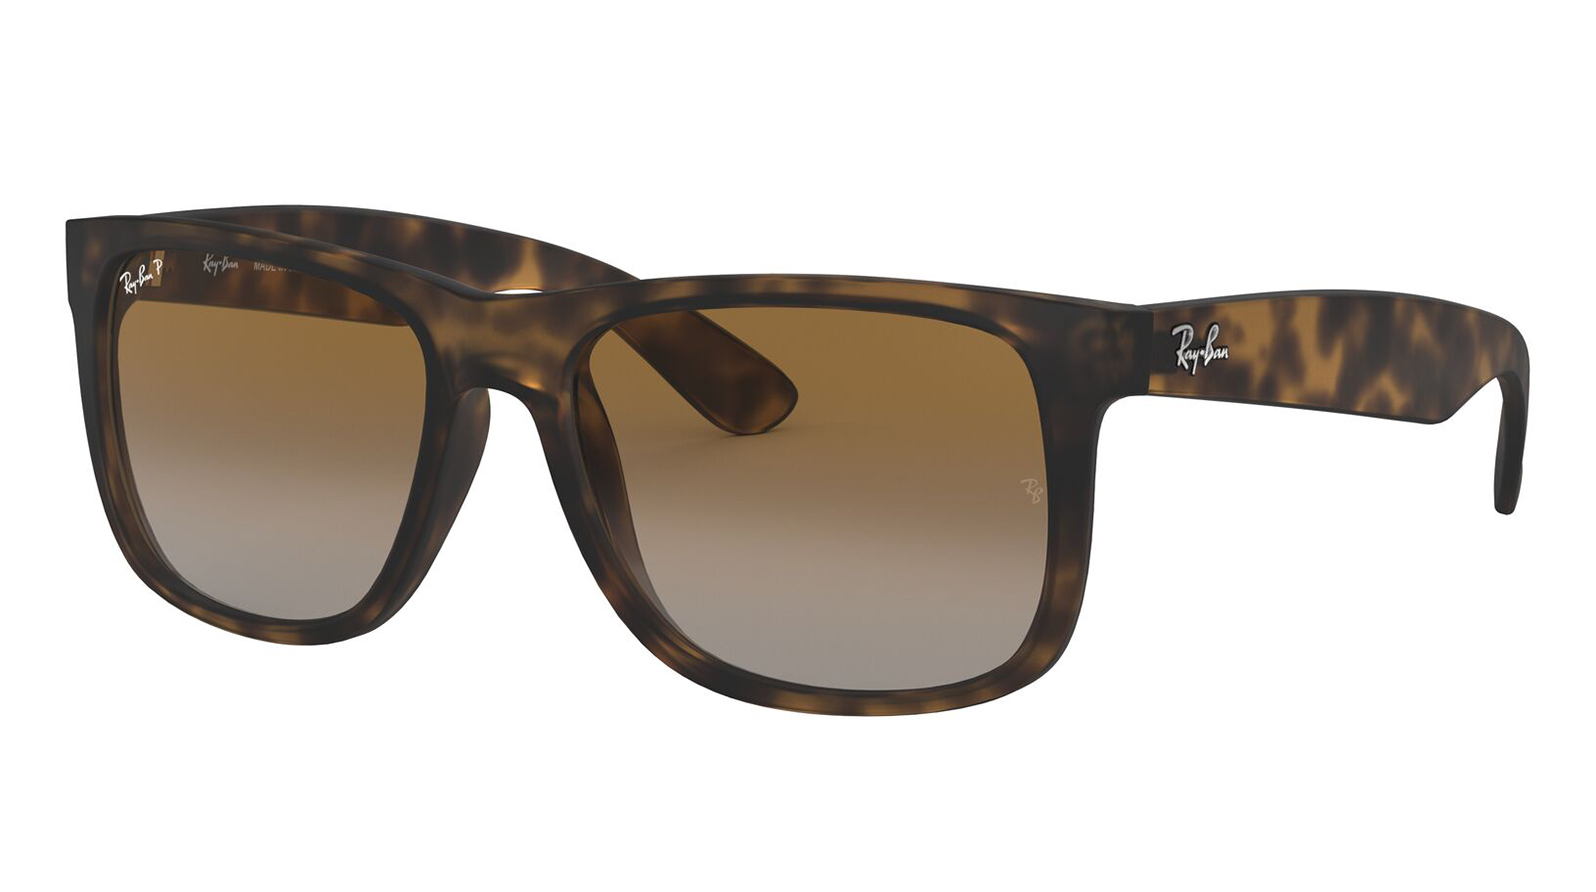 Ray-Ban Justin RB 4165 865/T5